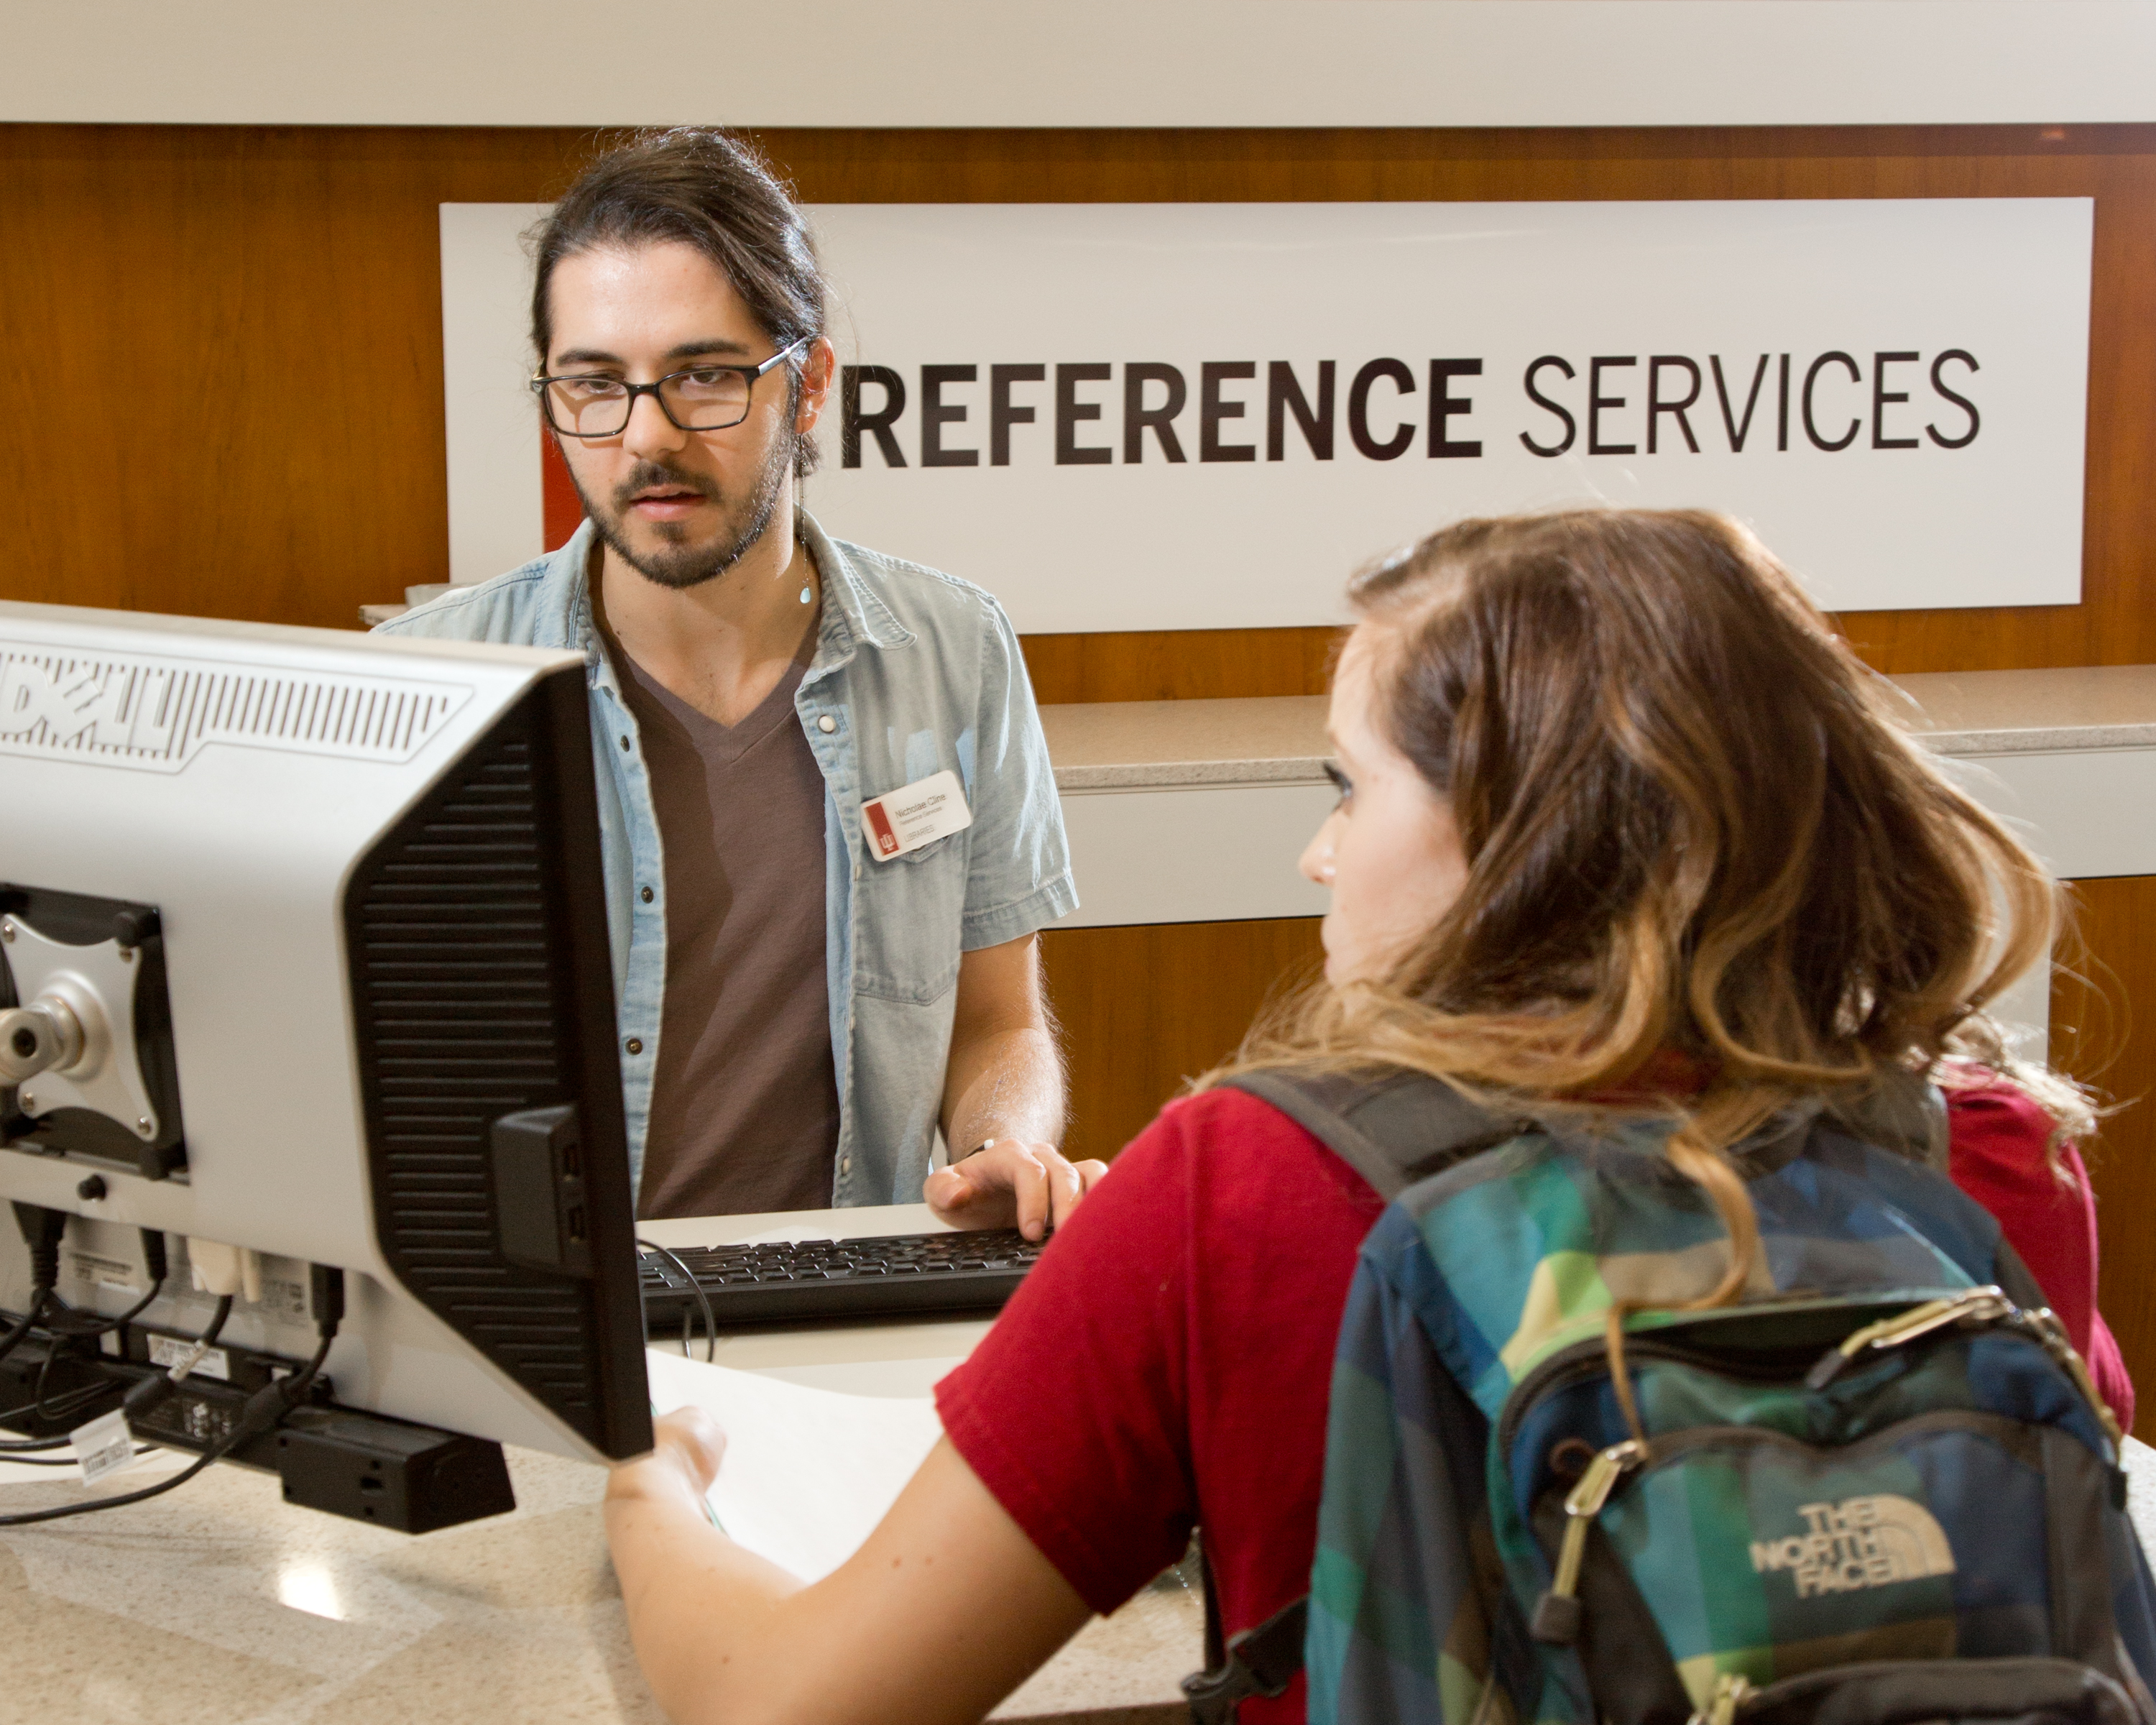 Librarian assisting a student at the Reference Services desk